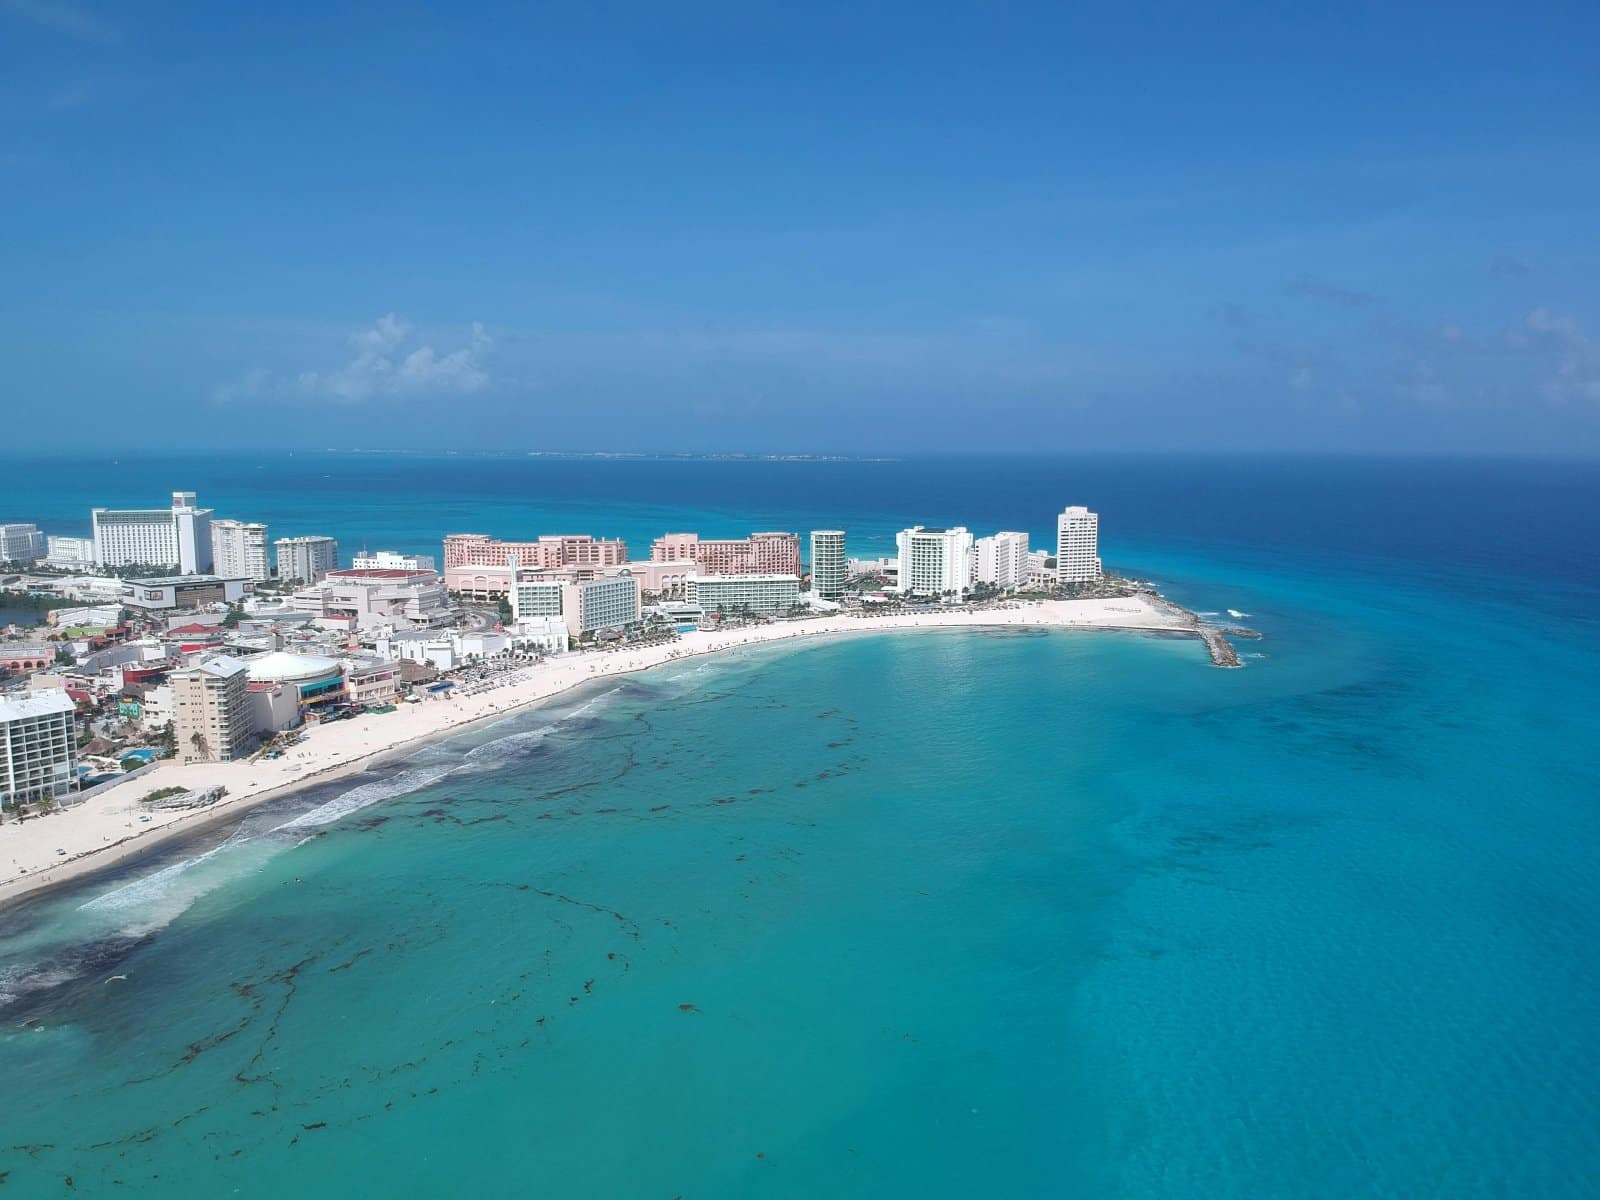 <p><span>Cancún is a destination where every traveler can find something to love. Whether you’re drawn to its pristine beaches, rich cultural heritage, vibrant nightlife, or adventure-filled activities, Cancún promises an unforgettable experience. Plan your trip with these tips to fully embrace all this coastal paradise has to offer.</span></p> <p><span>Remember, Cancún is more than a tourist destination; it’s a gateway to experiences that can enrich your understanding of Mexico’s culture and natural beauty. So pack your bags, bring your sense of adventure, and prepare to discover the many facets of Cancún.</span></p> <p><span>More Articles Like This…</span></p> <p><a href="https://thegreenvoyage.com/barcelona-discover-the-top-10-beach-clubs/"><span>Barcelona: Discover the Top 10 Beach Clubs</span></a></p> <p><a href="https://thegreenvoyage.com/top-destination-cities-to-visit/"><span>2024 Global City Travel Guide – Your Passport to the World’s Top Destination Cities</span></a></p> <p><a href="https://thegreenvoyage.com/exploring-khao-yai-a-hidden-gem-of-thailand/"><span>Exploring Khao Yai 2024 – A Hidden Gem of Thailand</span></a></p> <p><span>The post <a href="https://passingthru.com/ultimate-cancun-adventure/">Ultimate Cancún Adventure: Your 15-Step Guide to Mexico’s Coastal Gem</a> republished on </span><a href="https://passingthru.com/"><span>Passing Thru</span></a><span> with permission from </span><a href="https://thegreenvoyage.com/"><span>The Green Voyage</span></a><span>.</span></p> <p><span>Featured Image Credit: Shutterstock / Luis Alfonso Amaya Padron.</span></p> <p><span>For transparency, this content was partly developed with AI assistance and carefully curated by an experienced editor to be informative and ensure accuracy.</span></p>